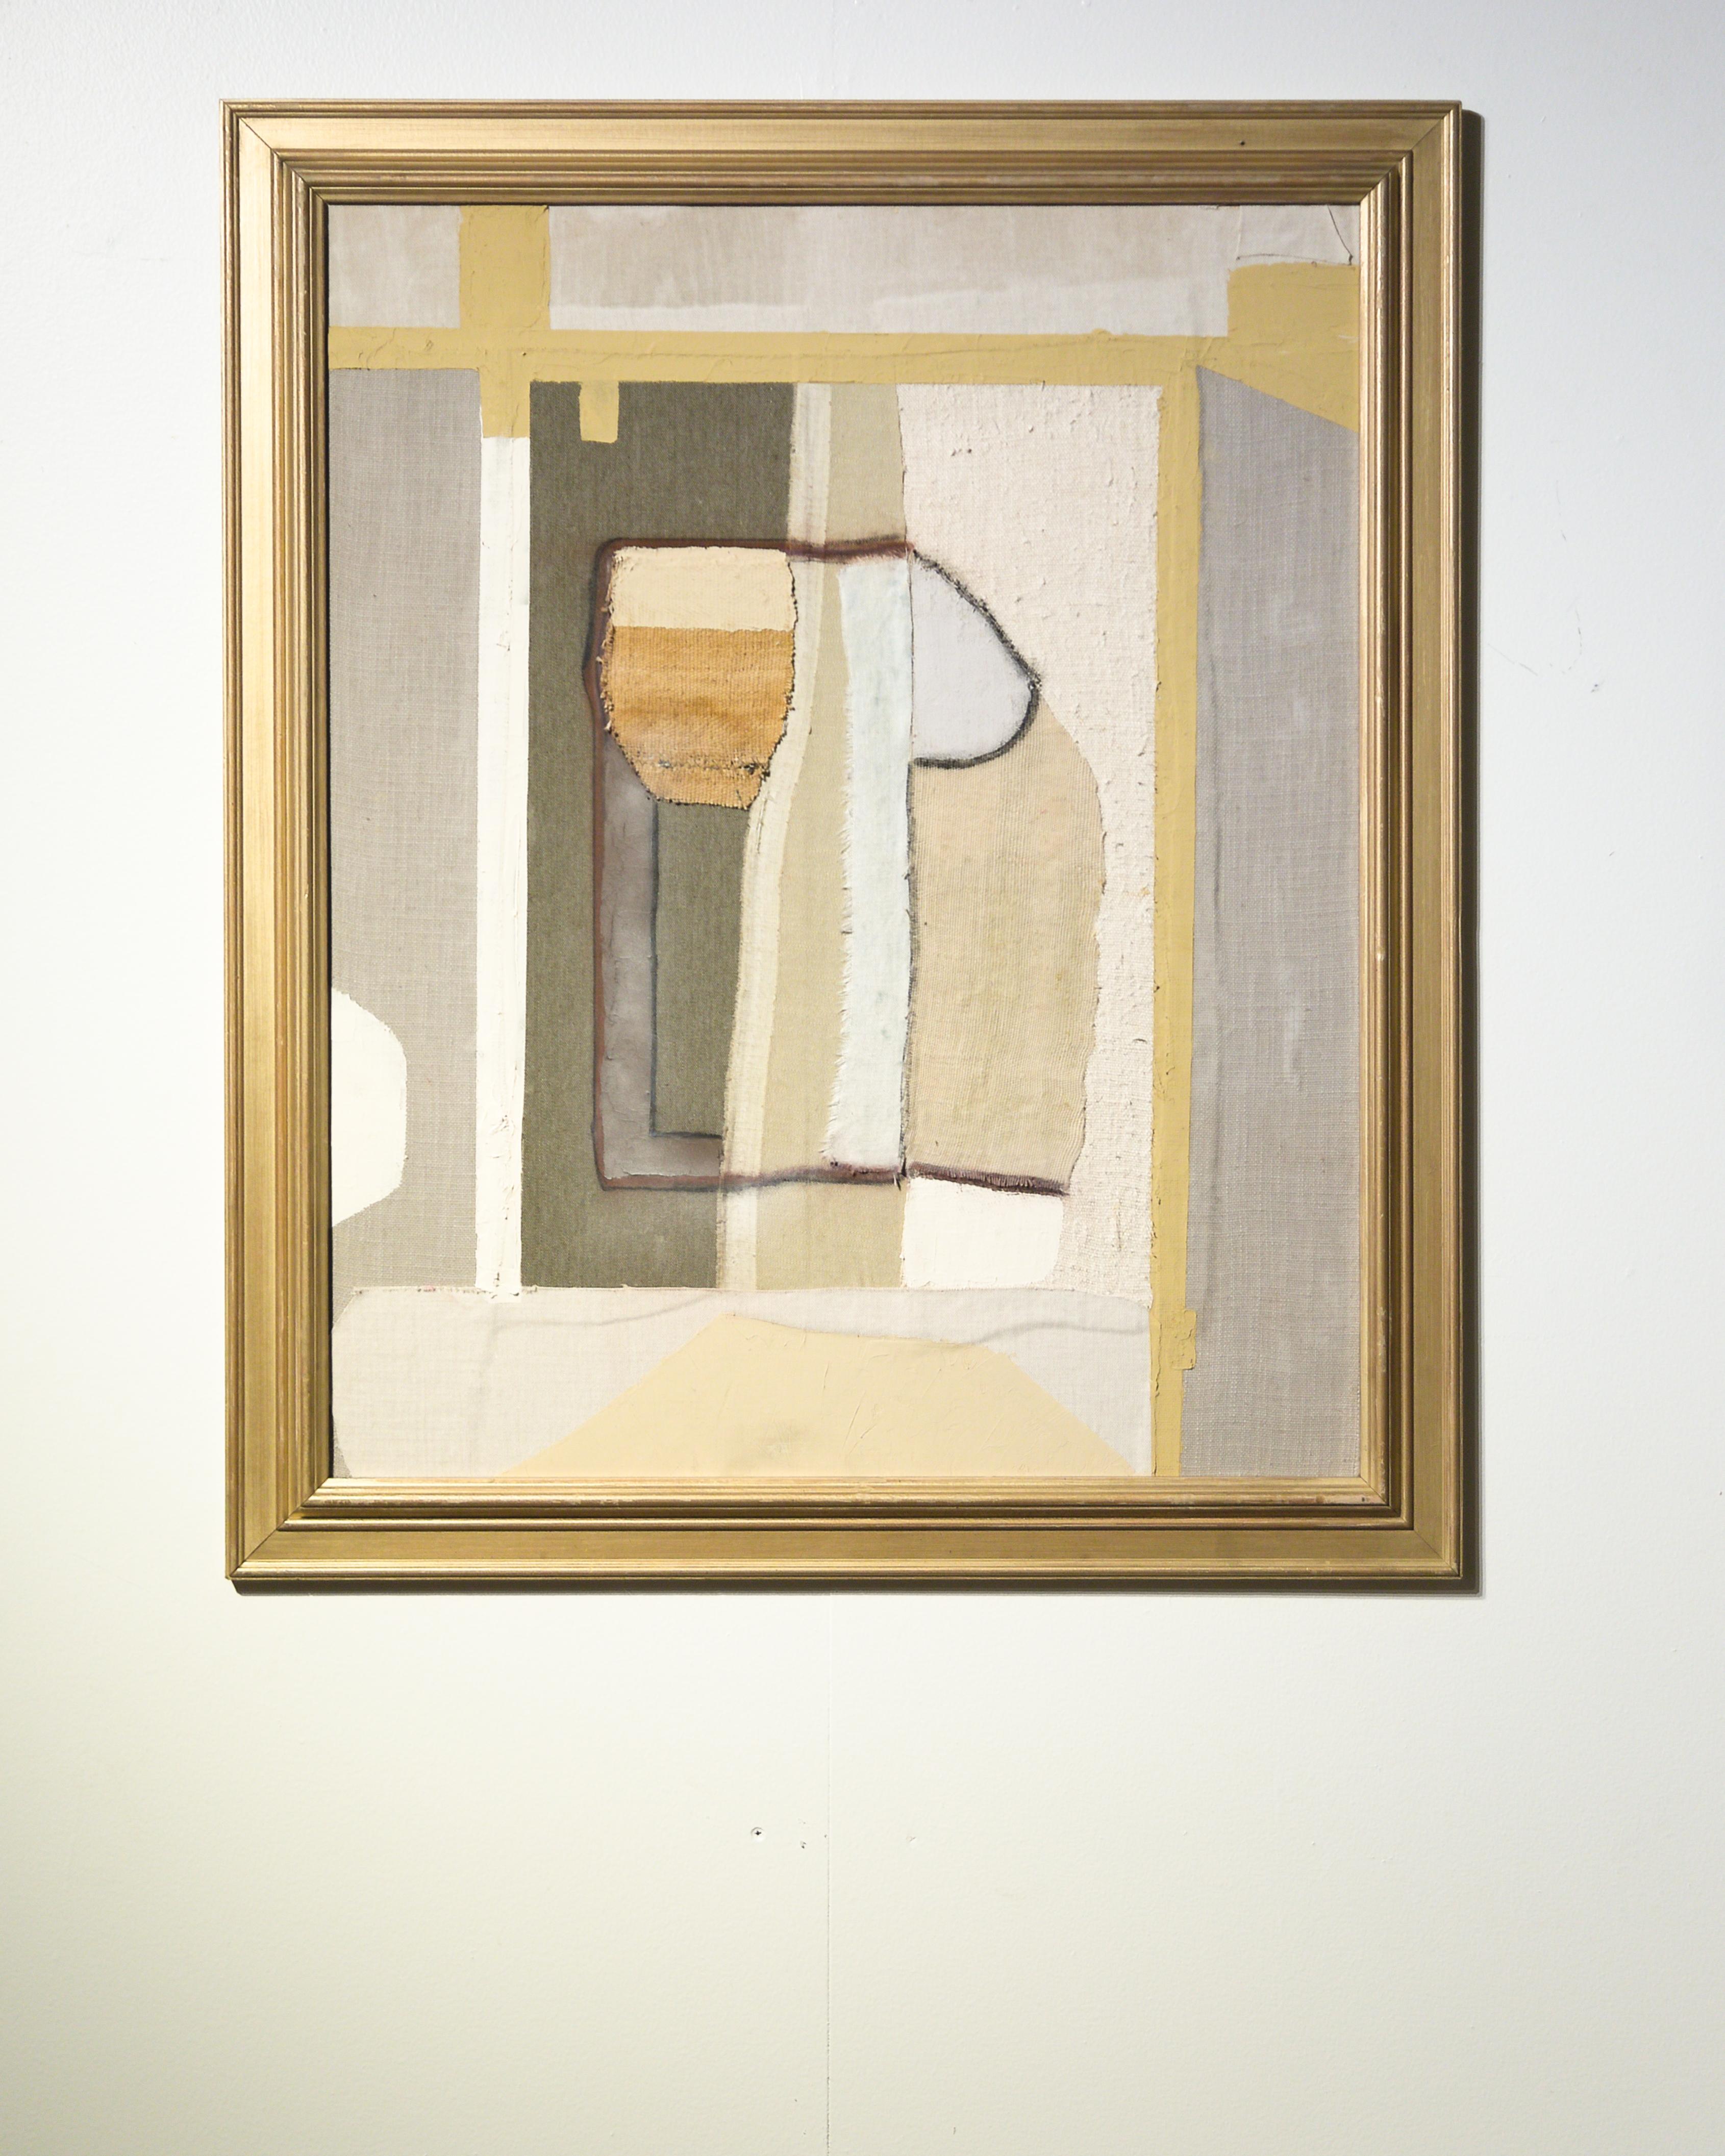 A framed textile collage by artist Raoul Morren, made in 2023. This dynamic composition, revolving around an enigmatic central figure, combines abstract shapes in a warm neutral palette – accentuated with vivid yellow ochre and a deep forest green.